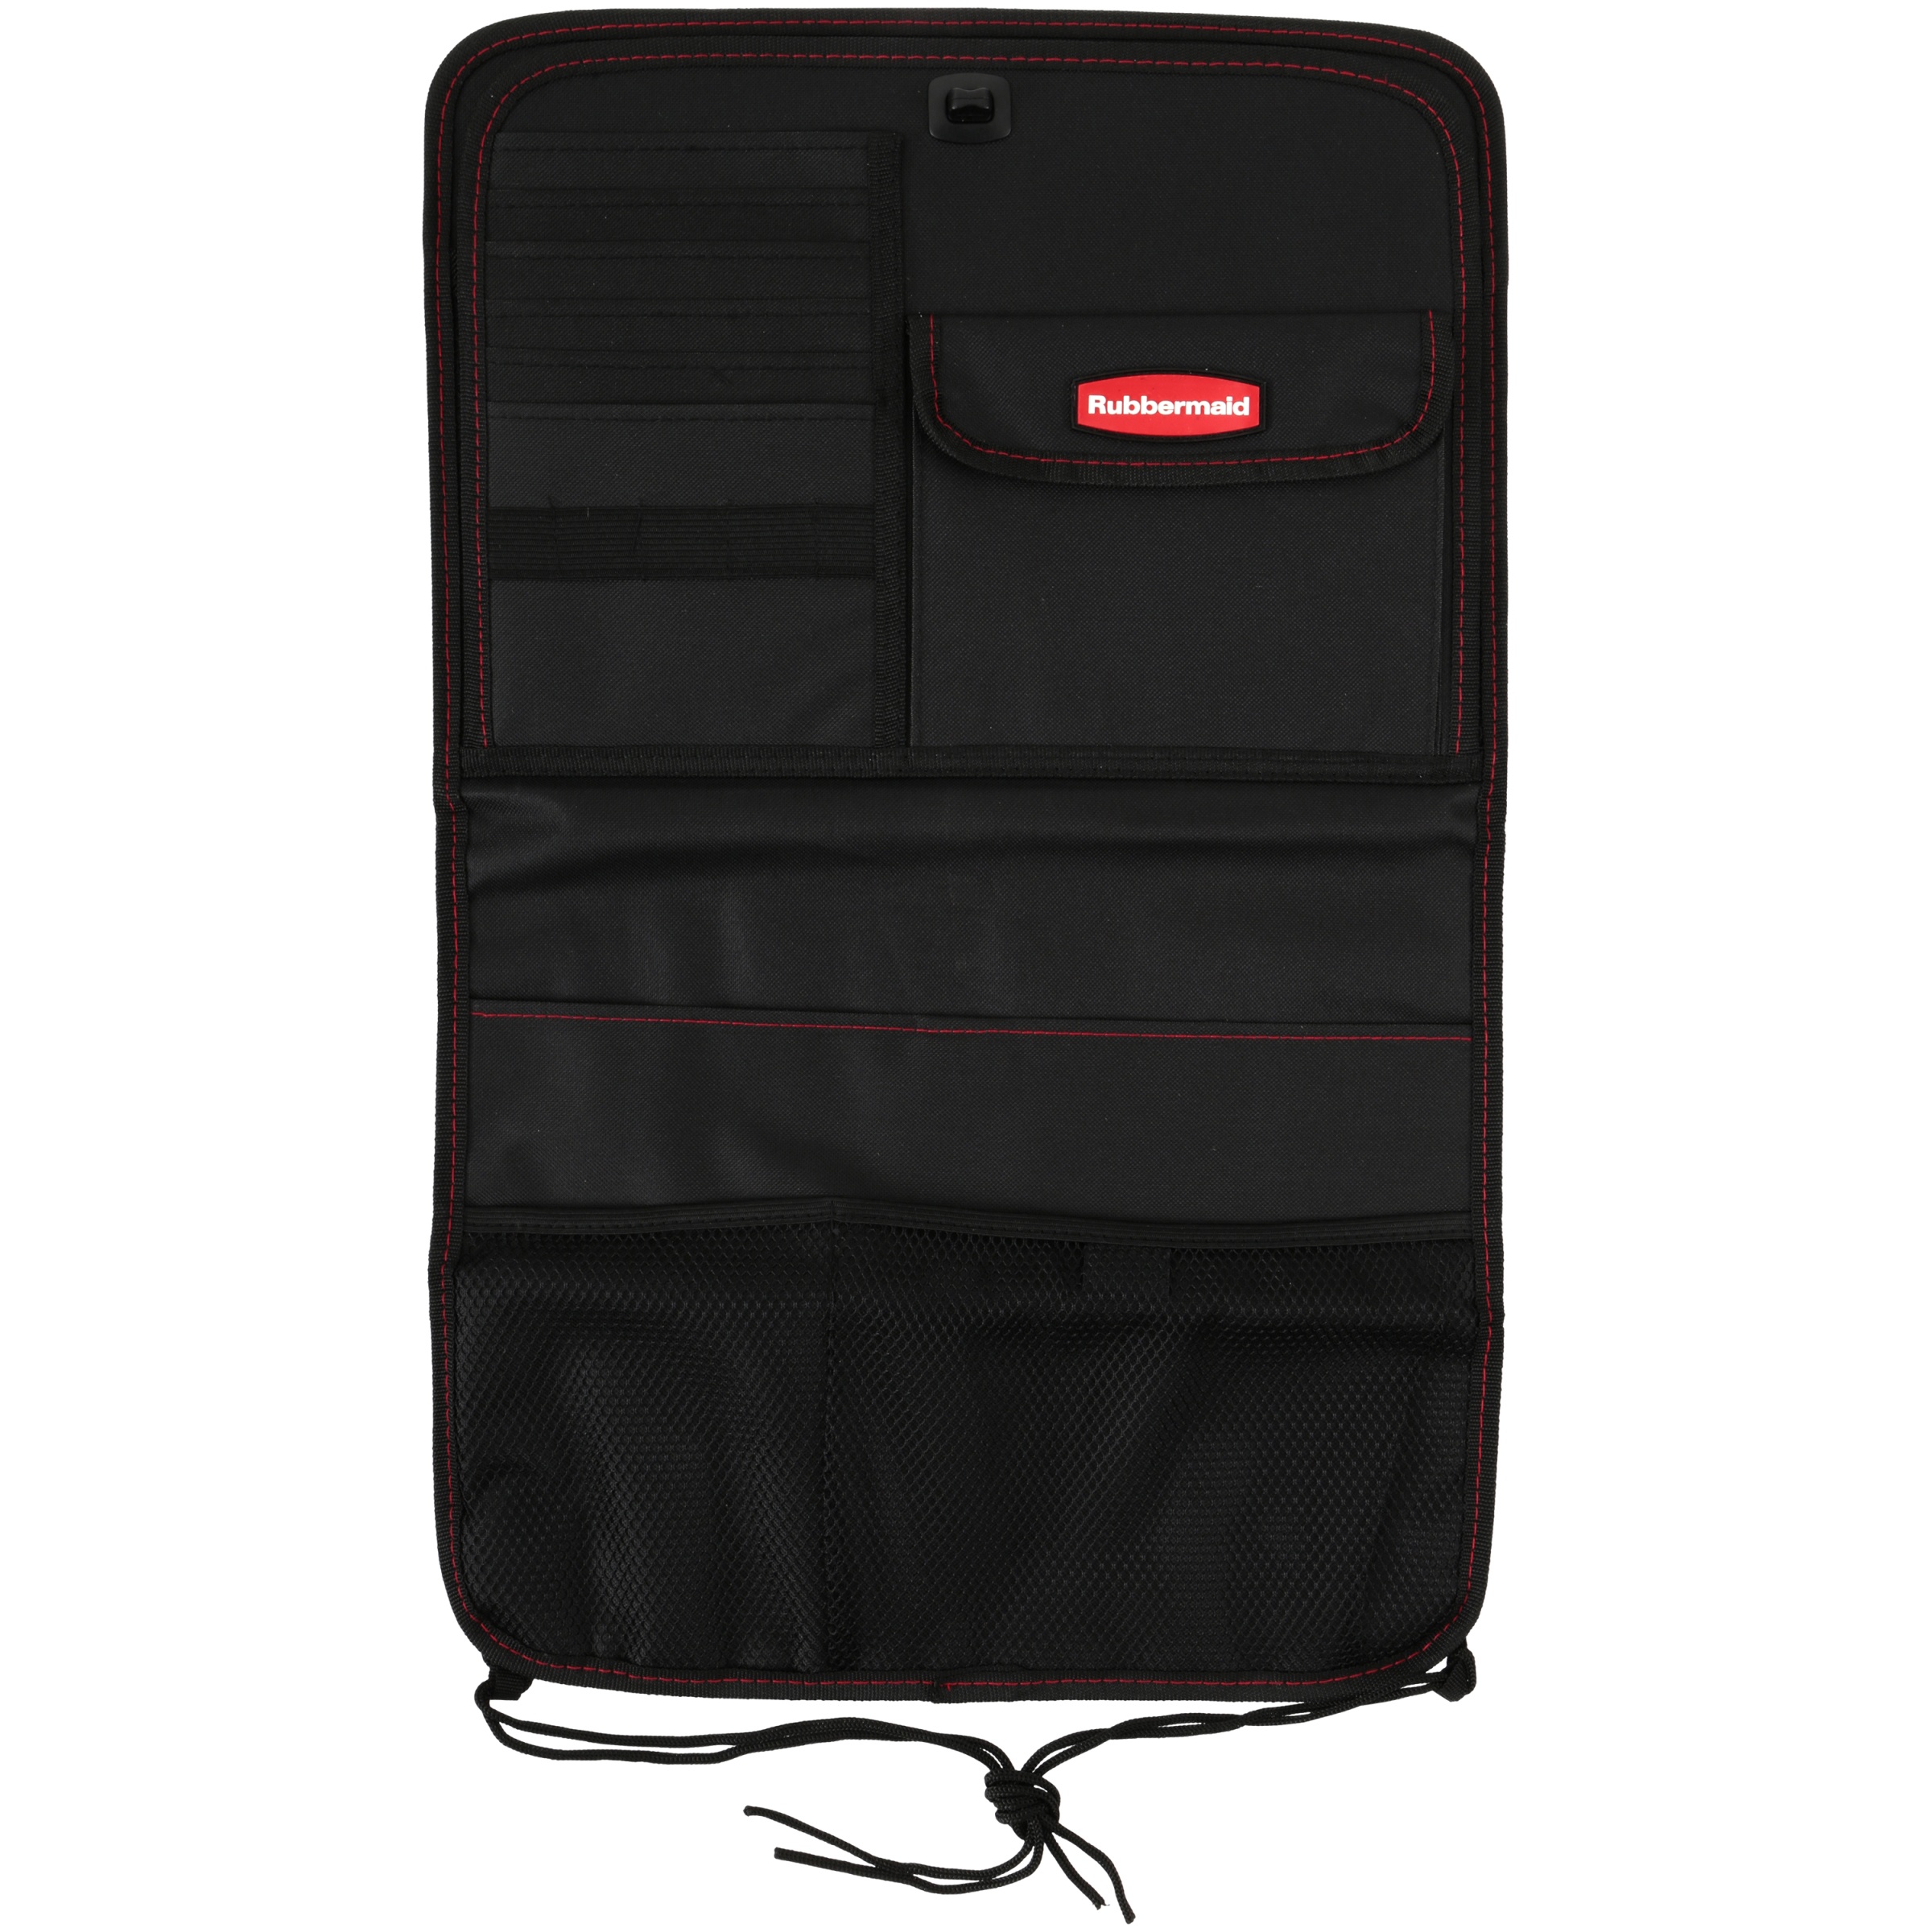 Rubbermaid Black Back Seat Organizer Car Interior Organization Secure Back Seat Organizer with Pockets Perfect for Coloring Books iPads Registration Papers Crayons & Markers - image 3 of 4